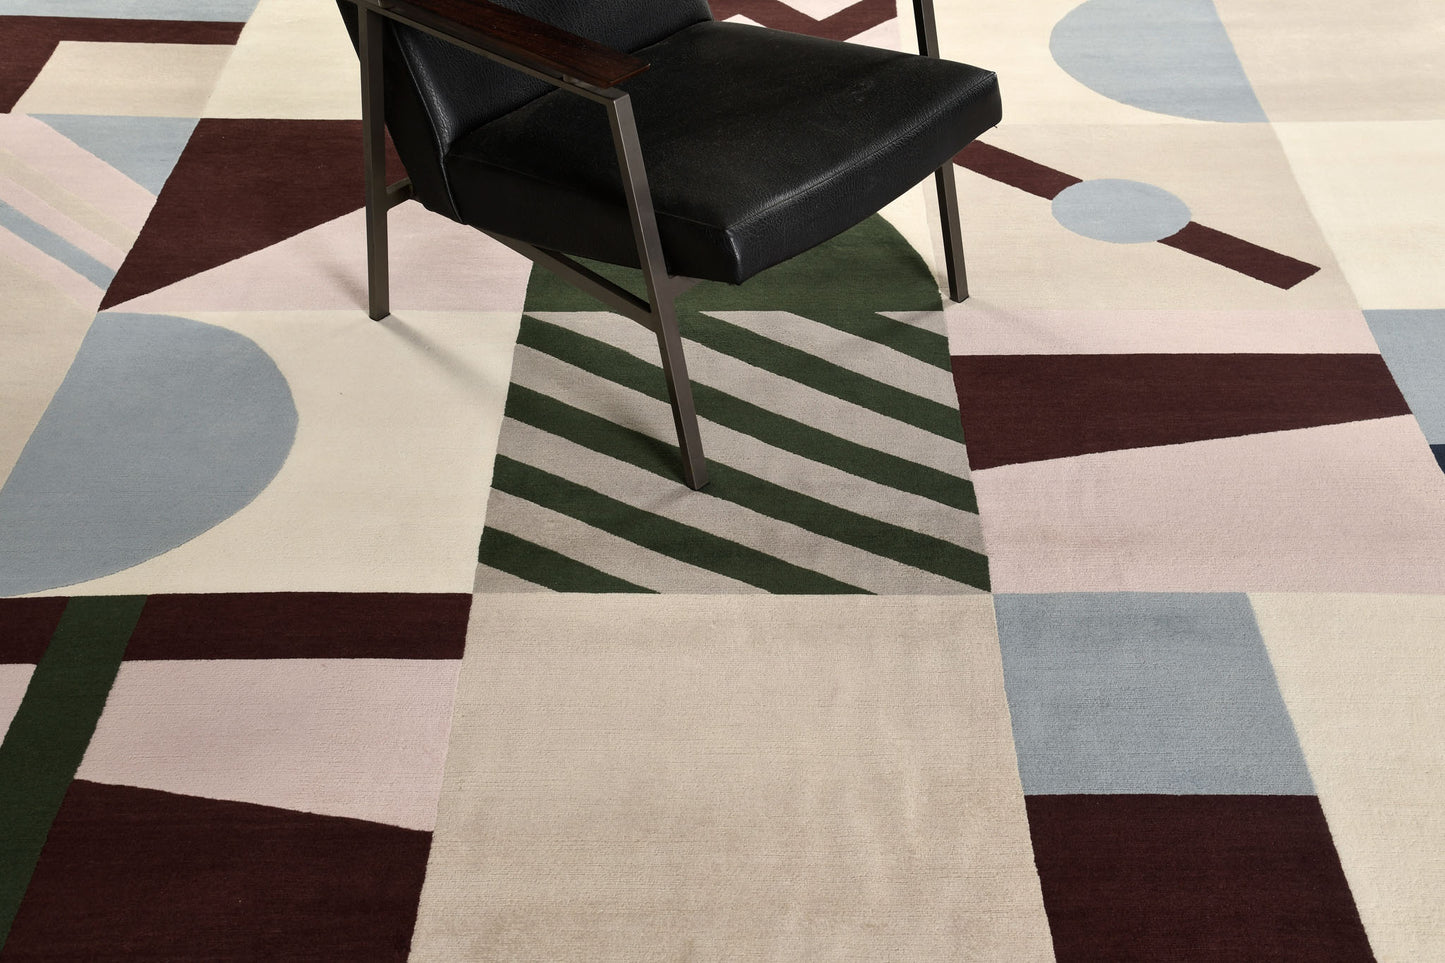 Modern Rug Image 9198 Pazzo, Baci Collection by Citizen Artist